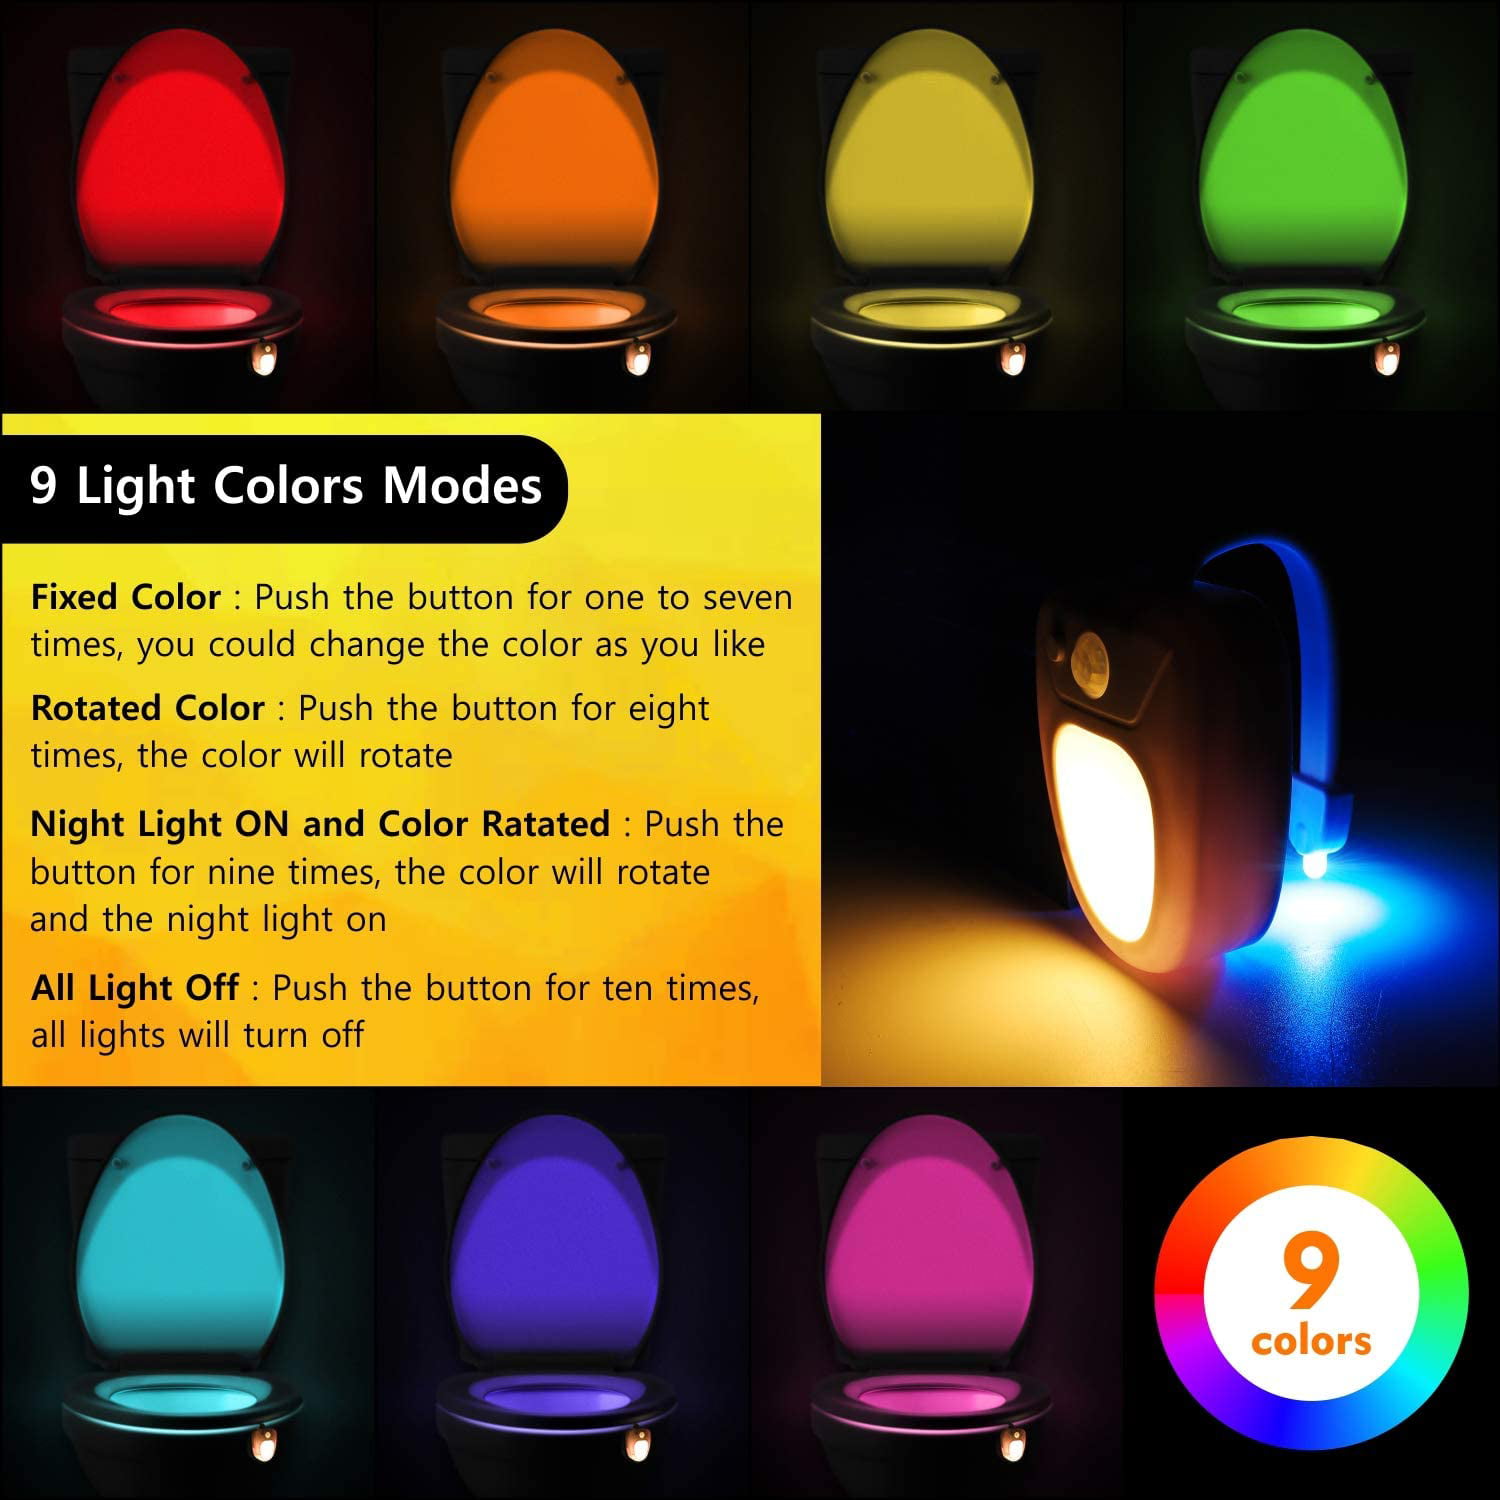 Baytek 8-Color Motion Activated Toilet Nightlight (Fits ANY Toilet